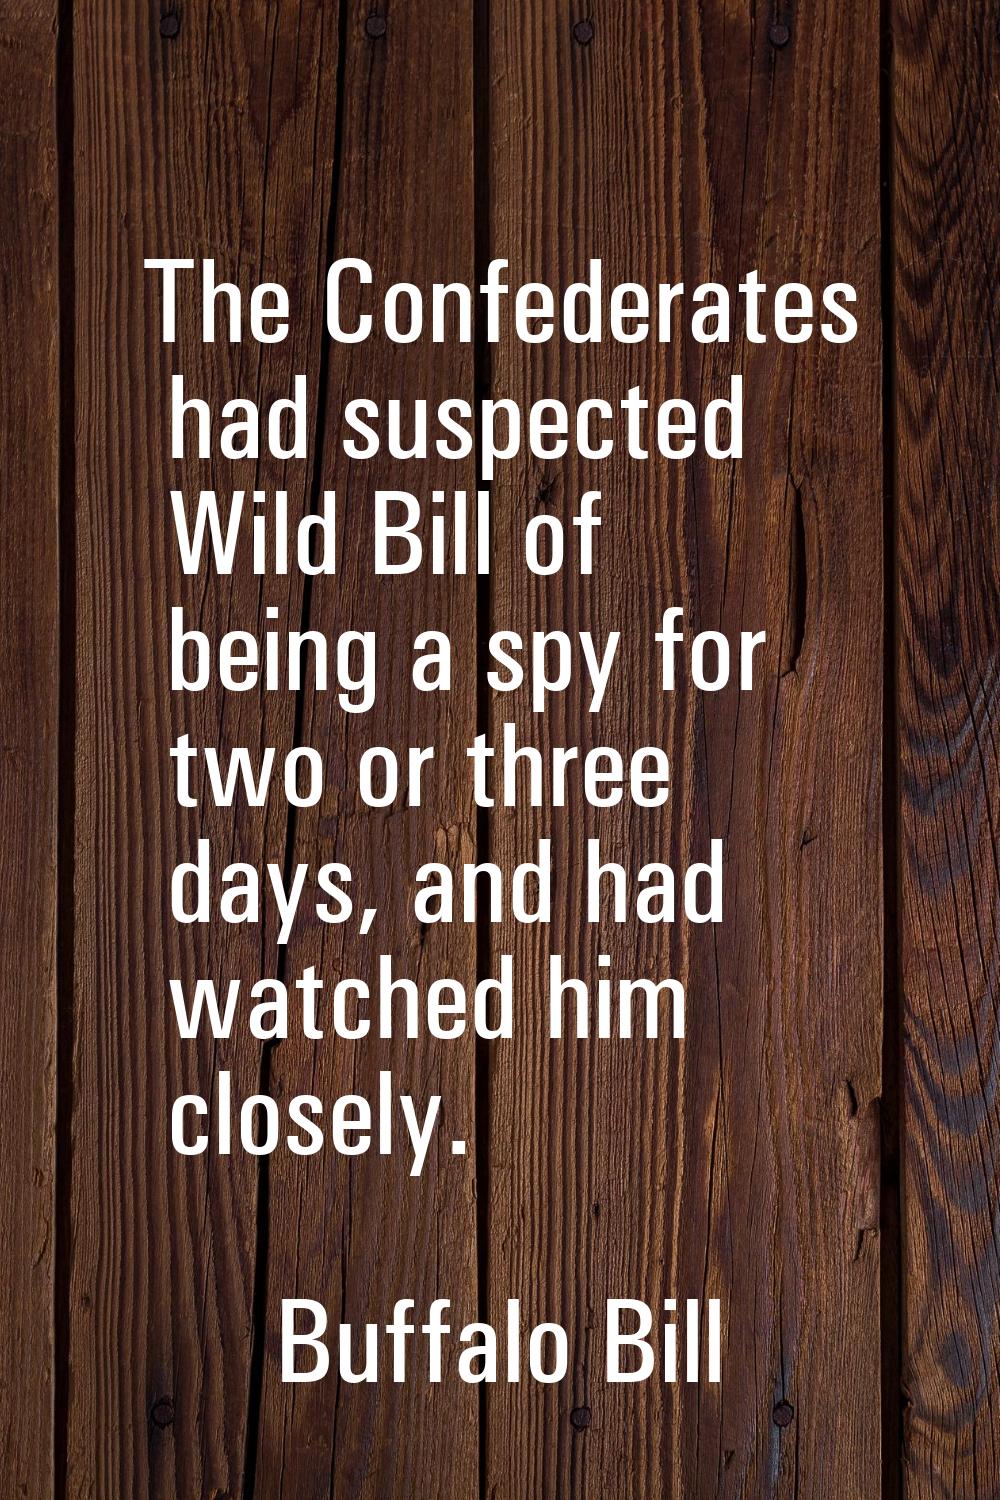 The Confederates had suspected Wild Bill of being a spy for two or three days, and had watched him 